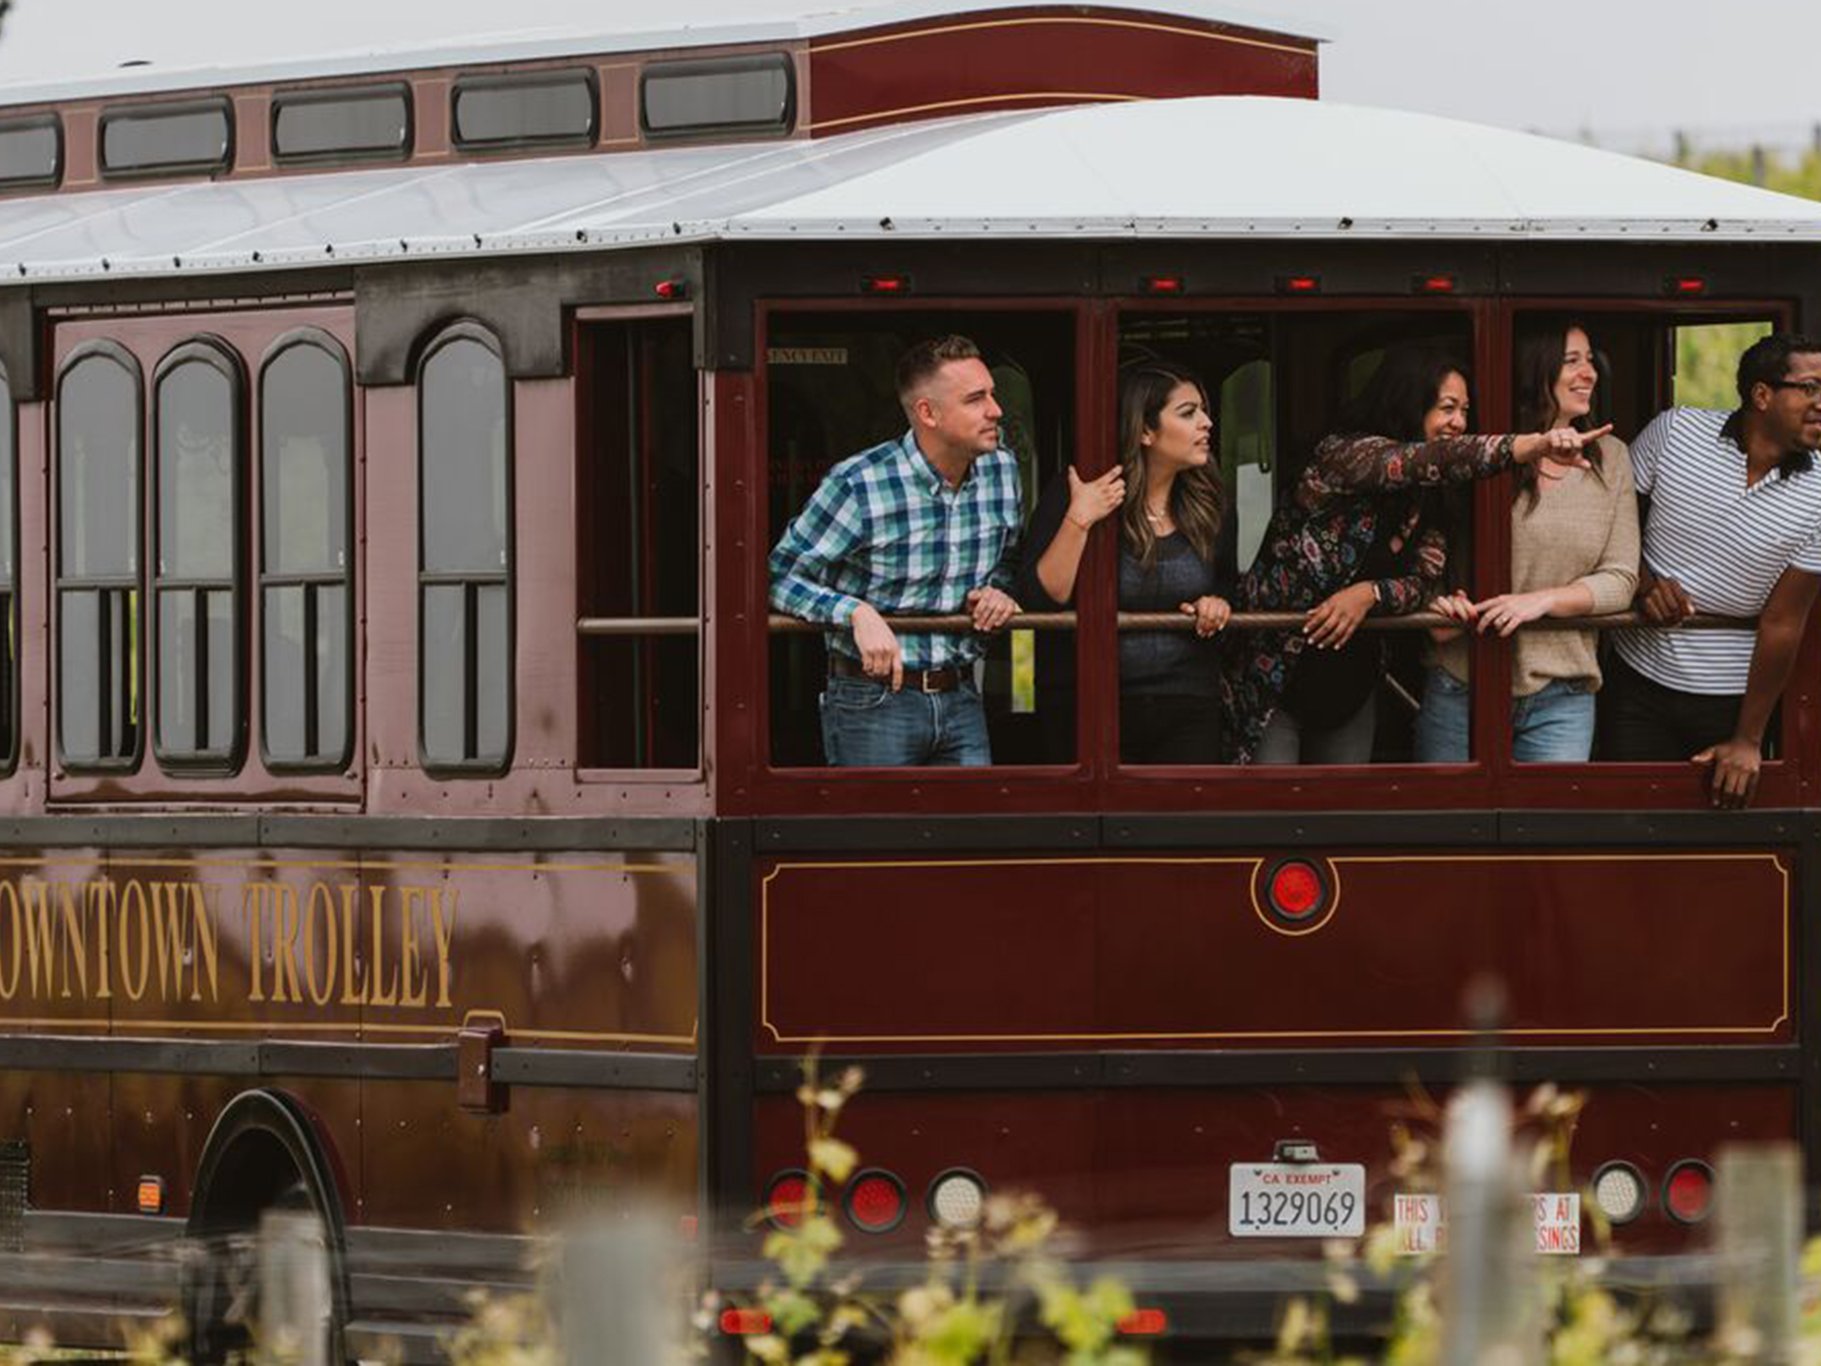 The trolley is a good option for travellers looking to explore California wine country on a budget.